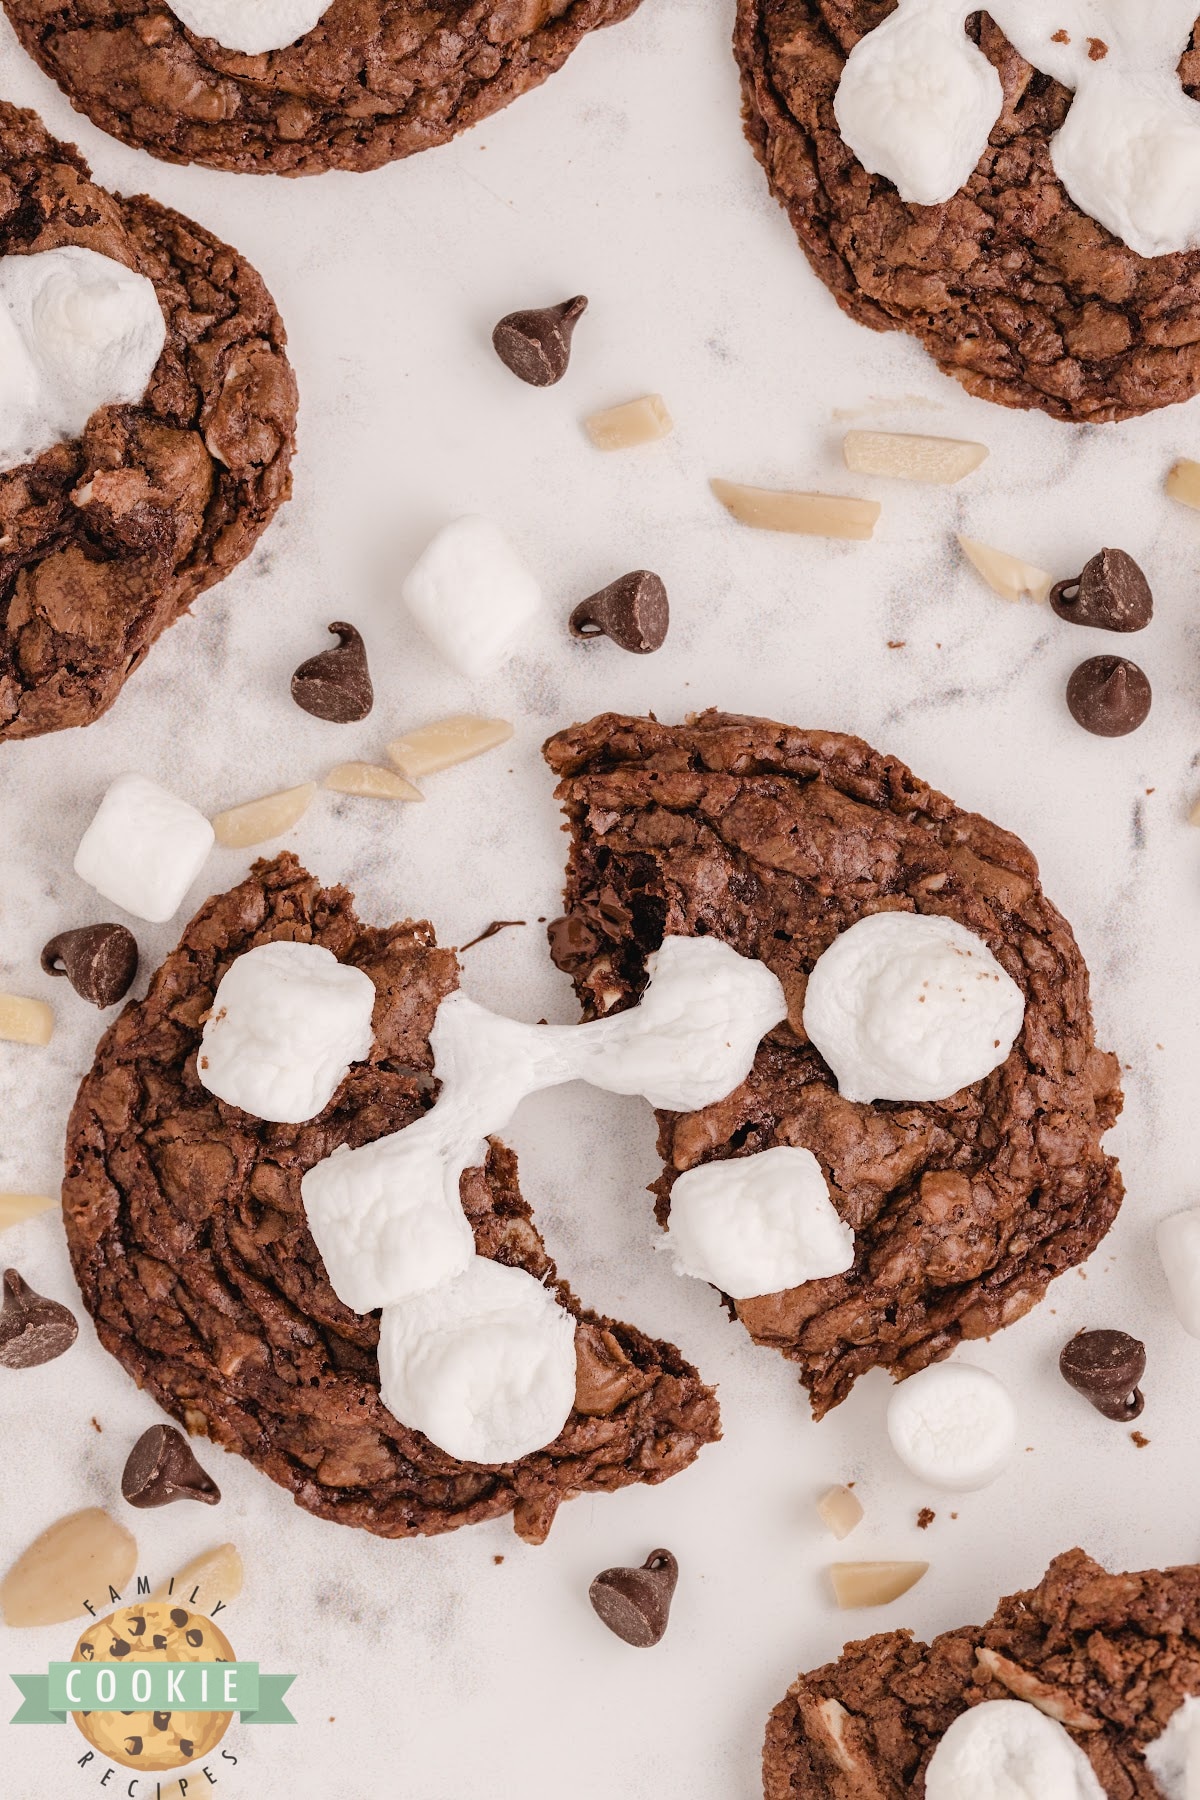 Chocolate cookies with almonds and marshmallows